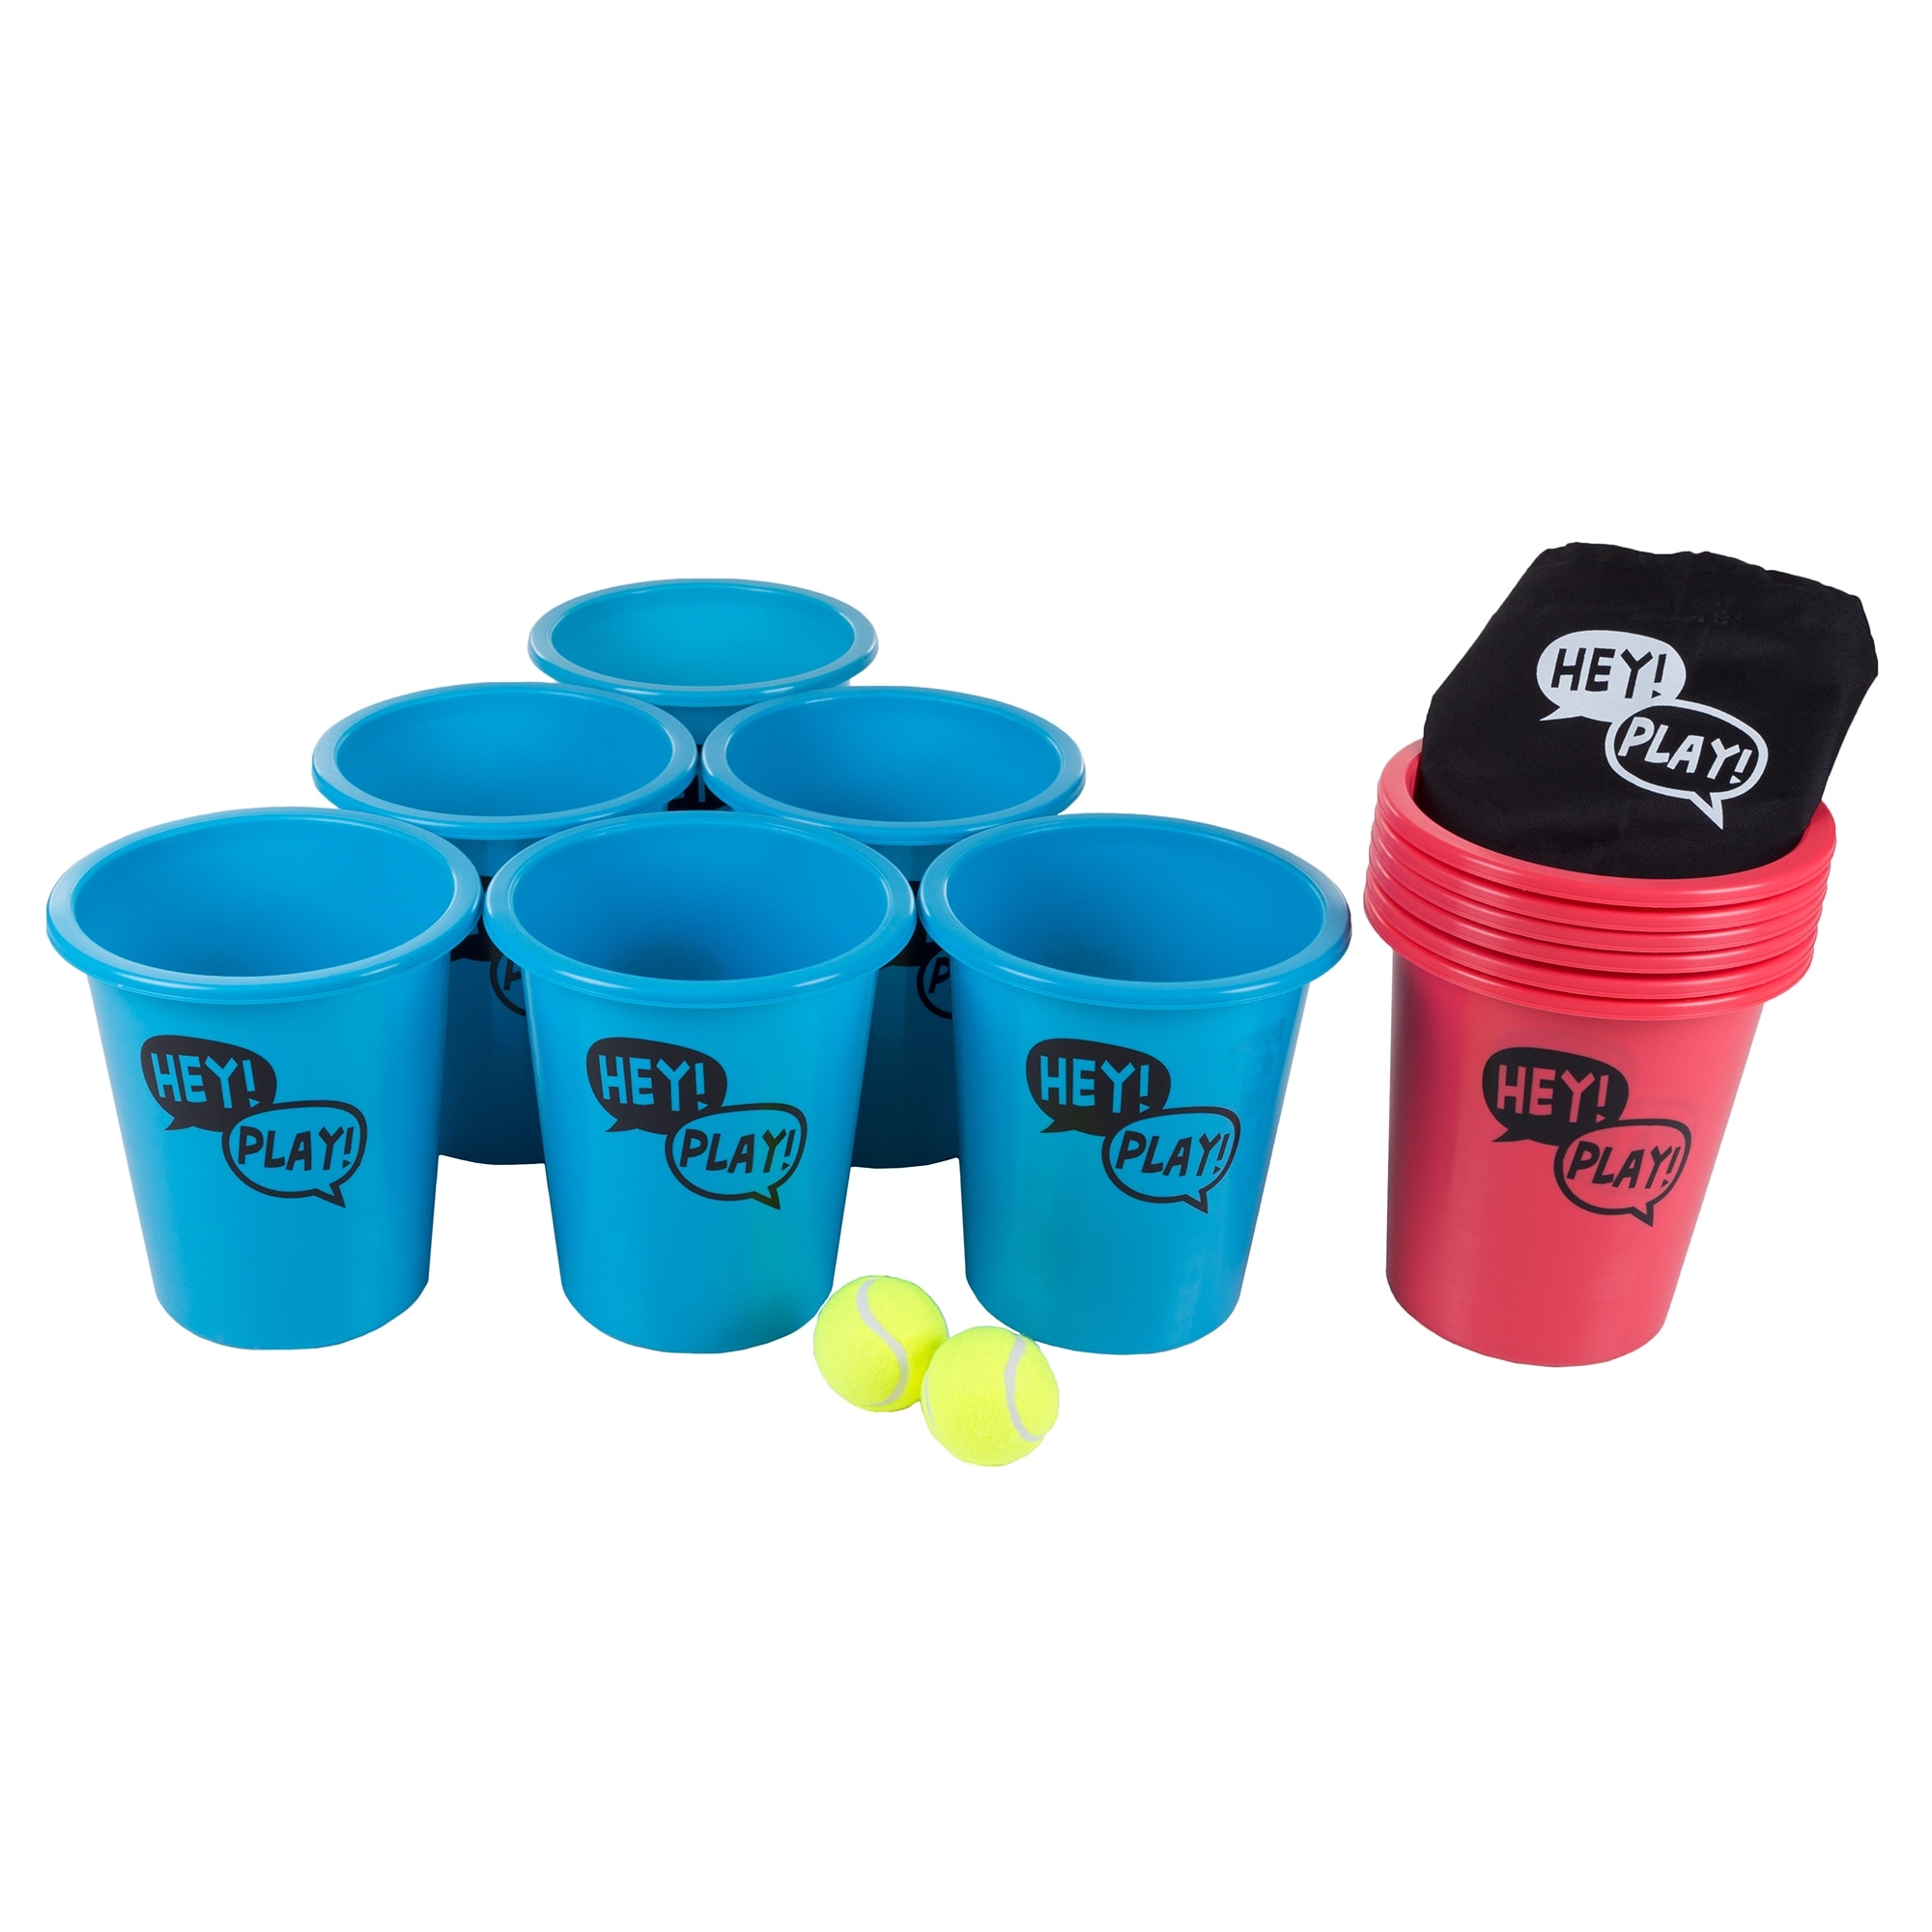 BucketBall 12 Color Options Ultimate Tailgate Game Team Color Edition Original Yard Pong Game